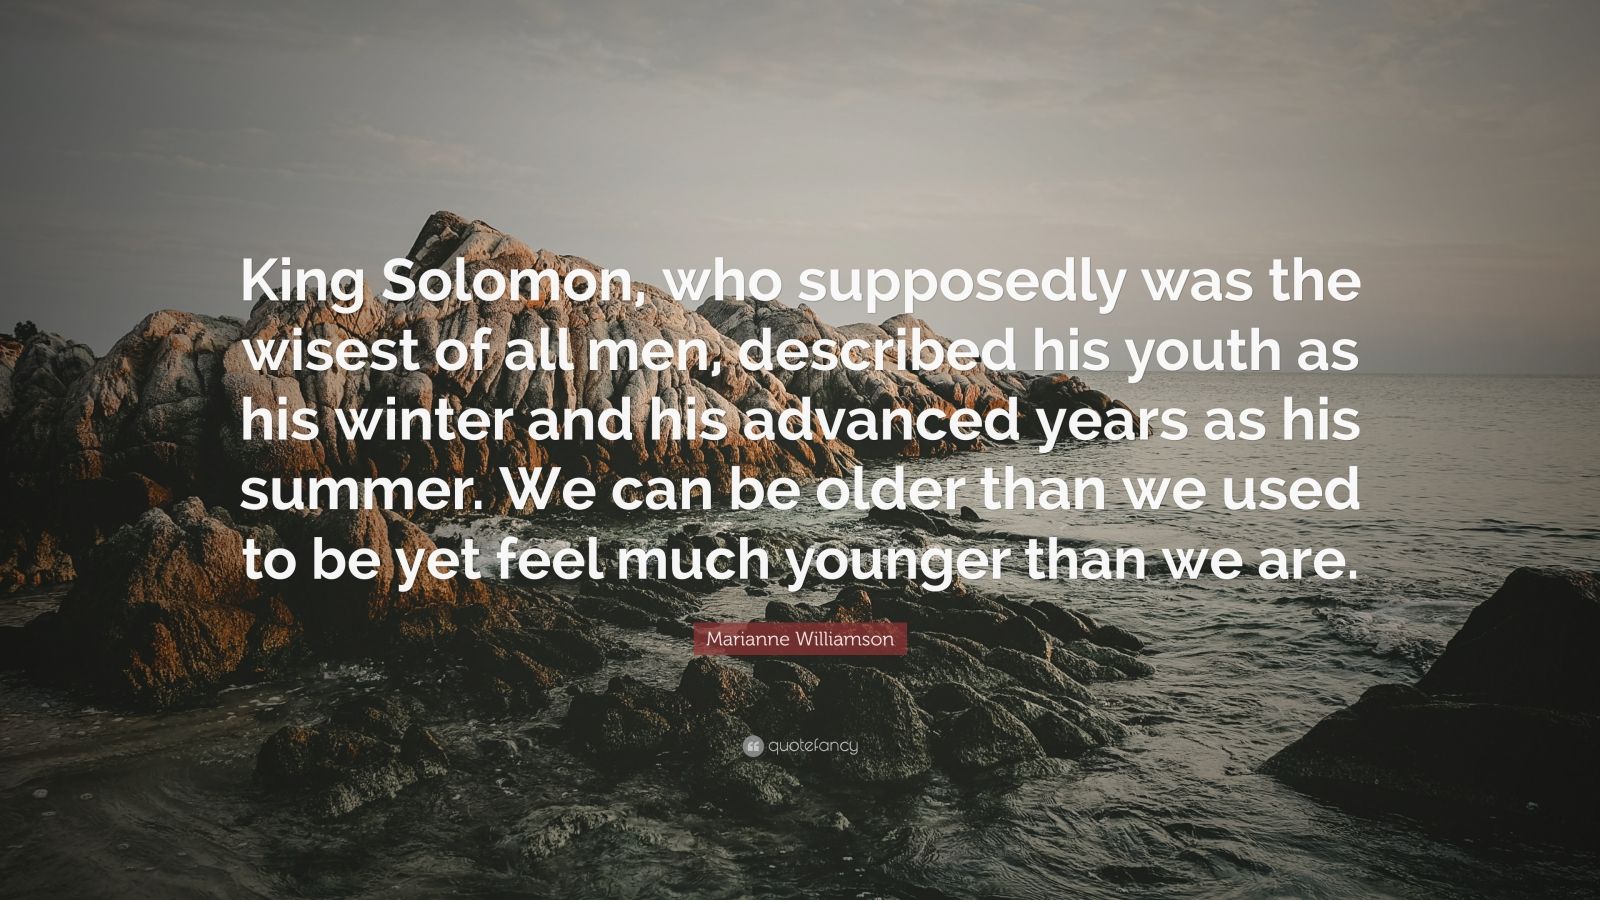 Marianne Williamson Quote: “King Solomon, who supposedly was the wisest